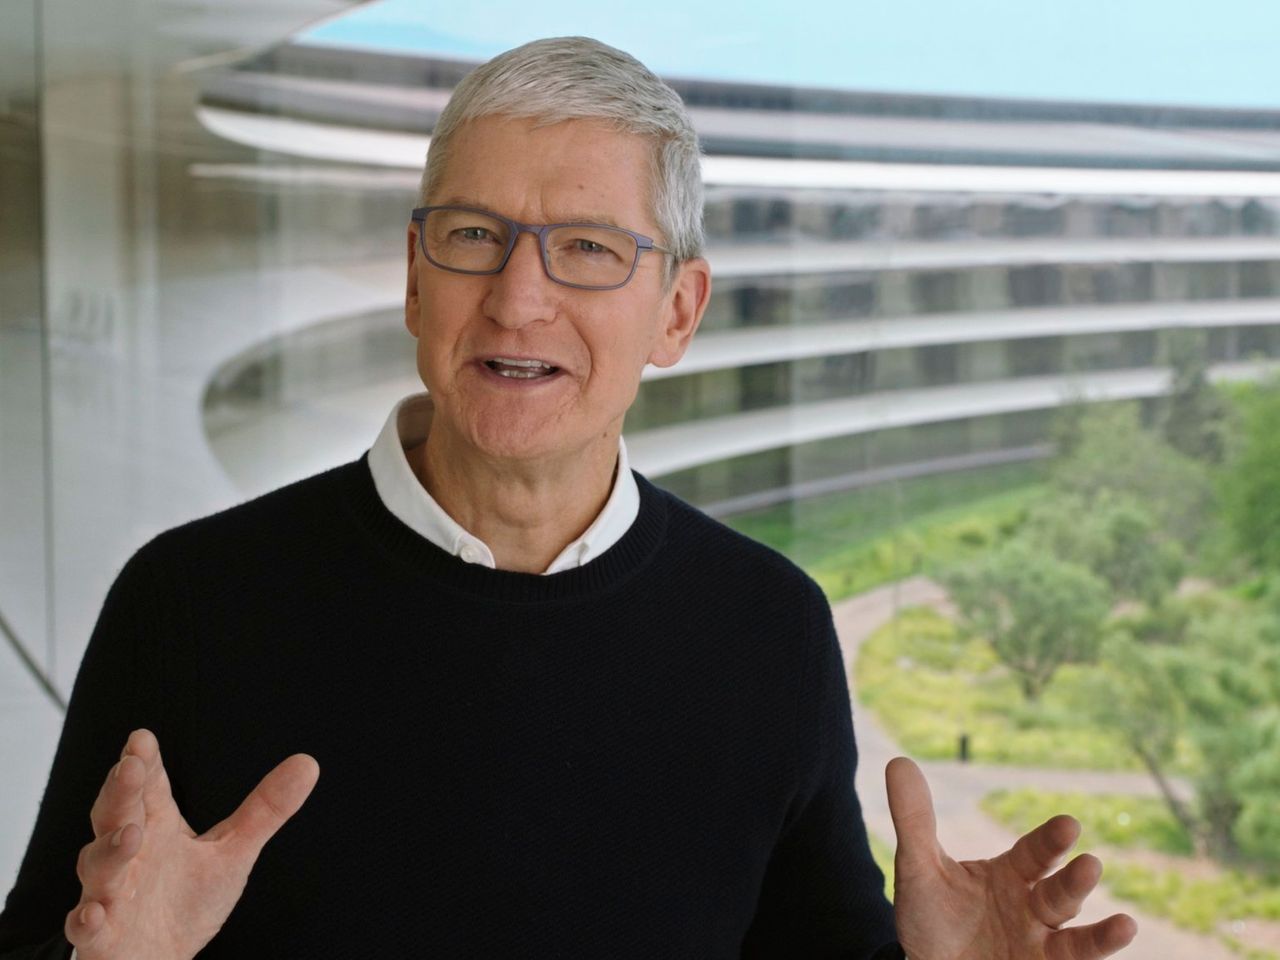 High Quality Tim Cook Presenting a Product Blank Meme Template